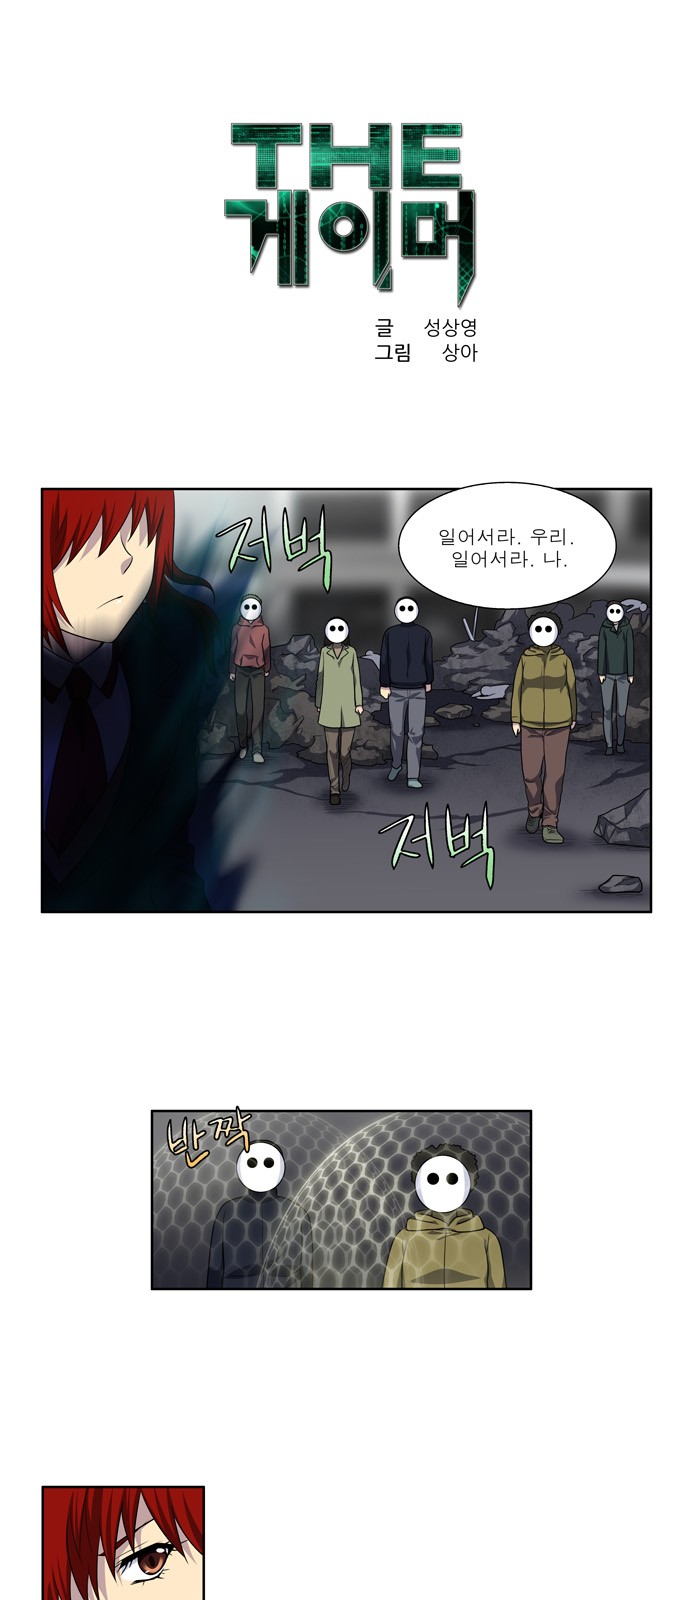 The Gamer - Chapter 193 - Page 1